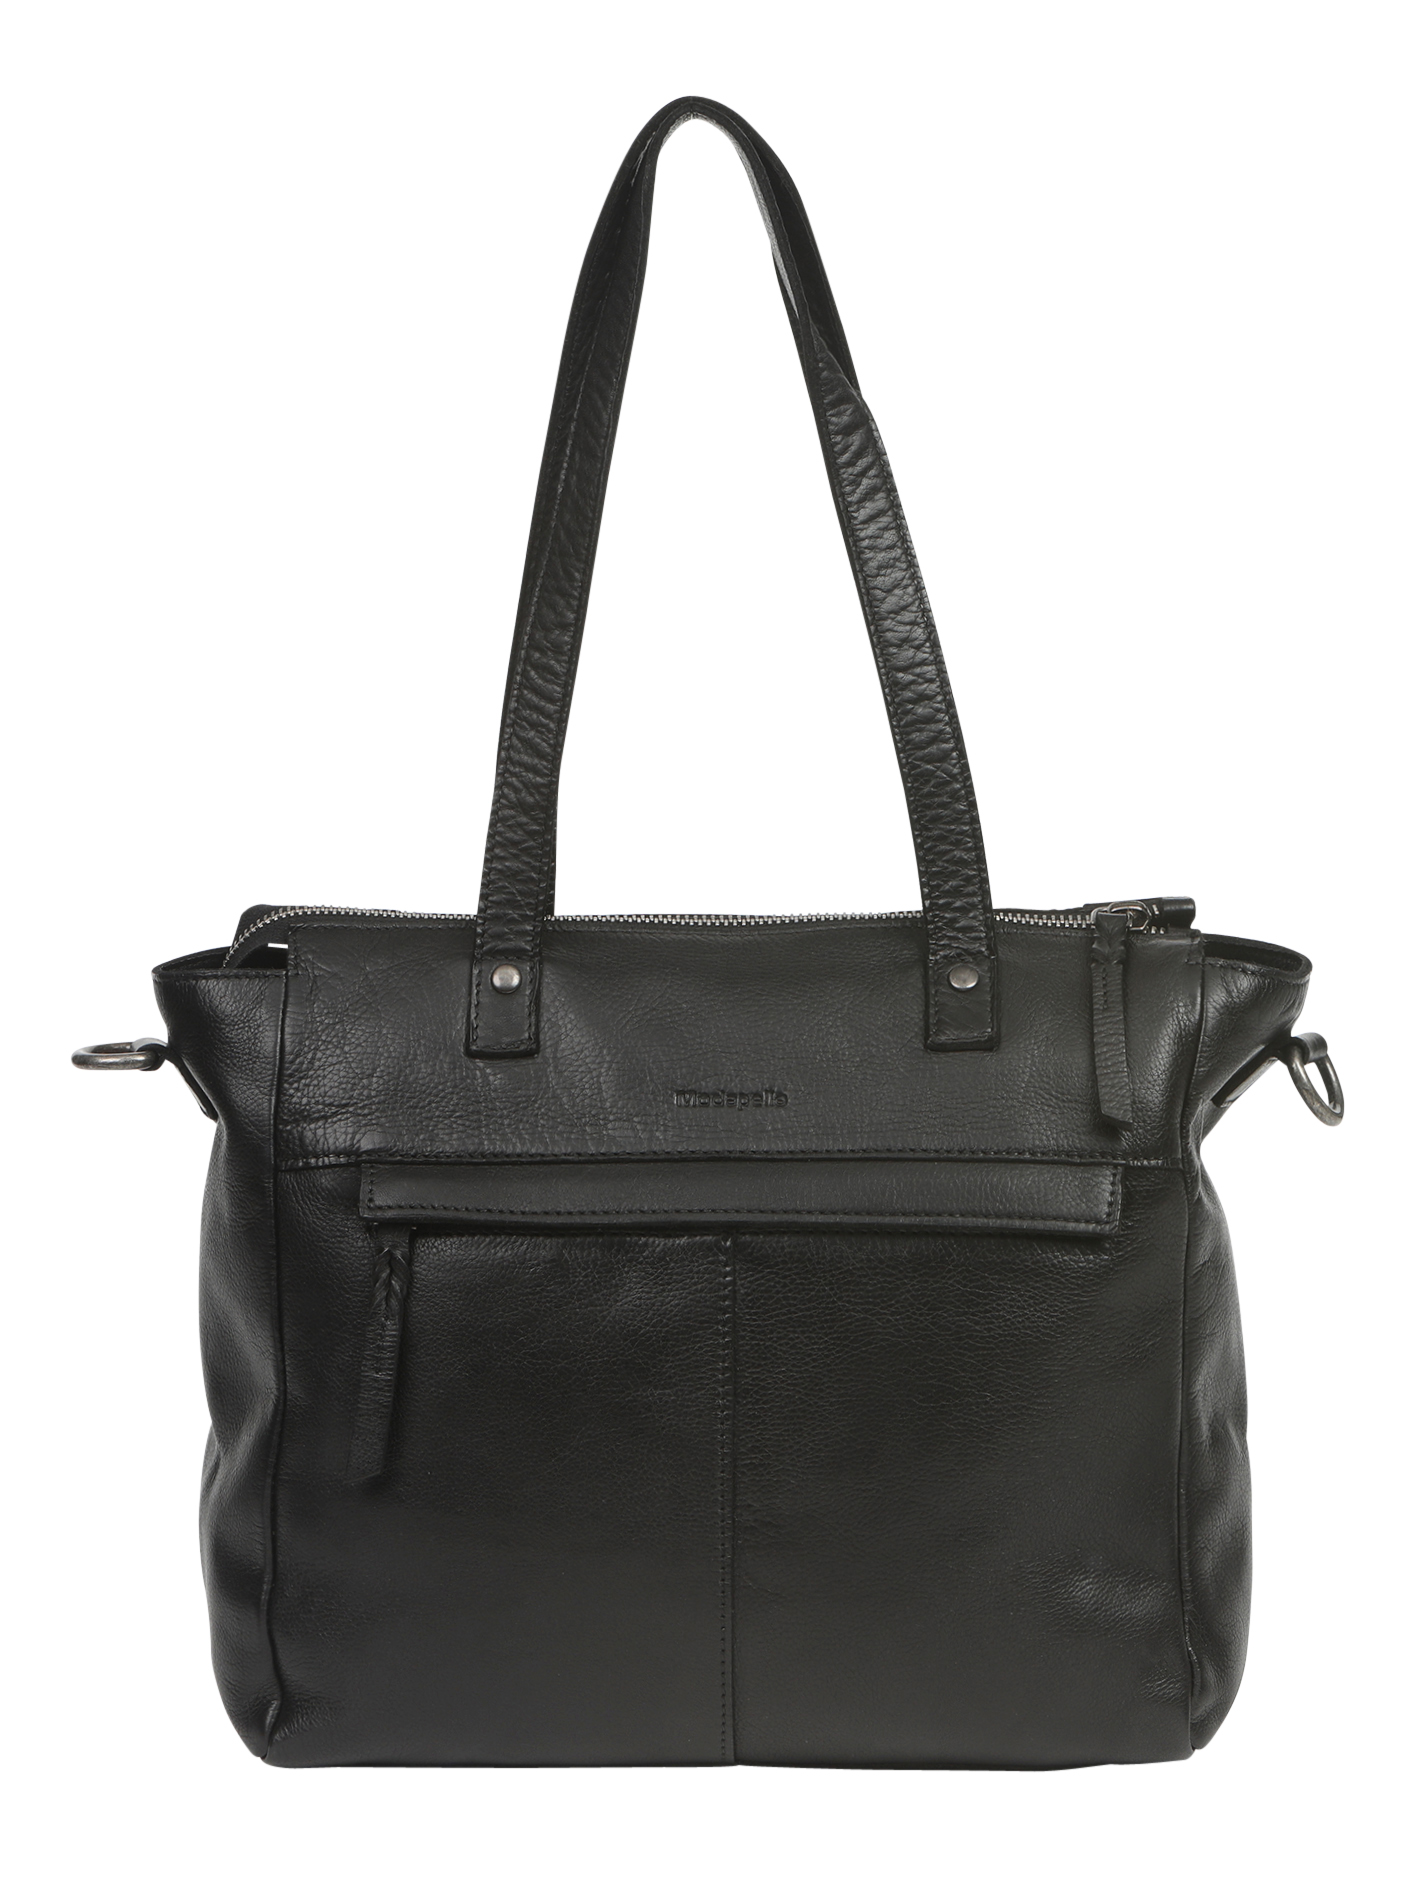 Ladies Leather Cross Body/Leather Tote 6631 Black - Modapelle Direct